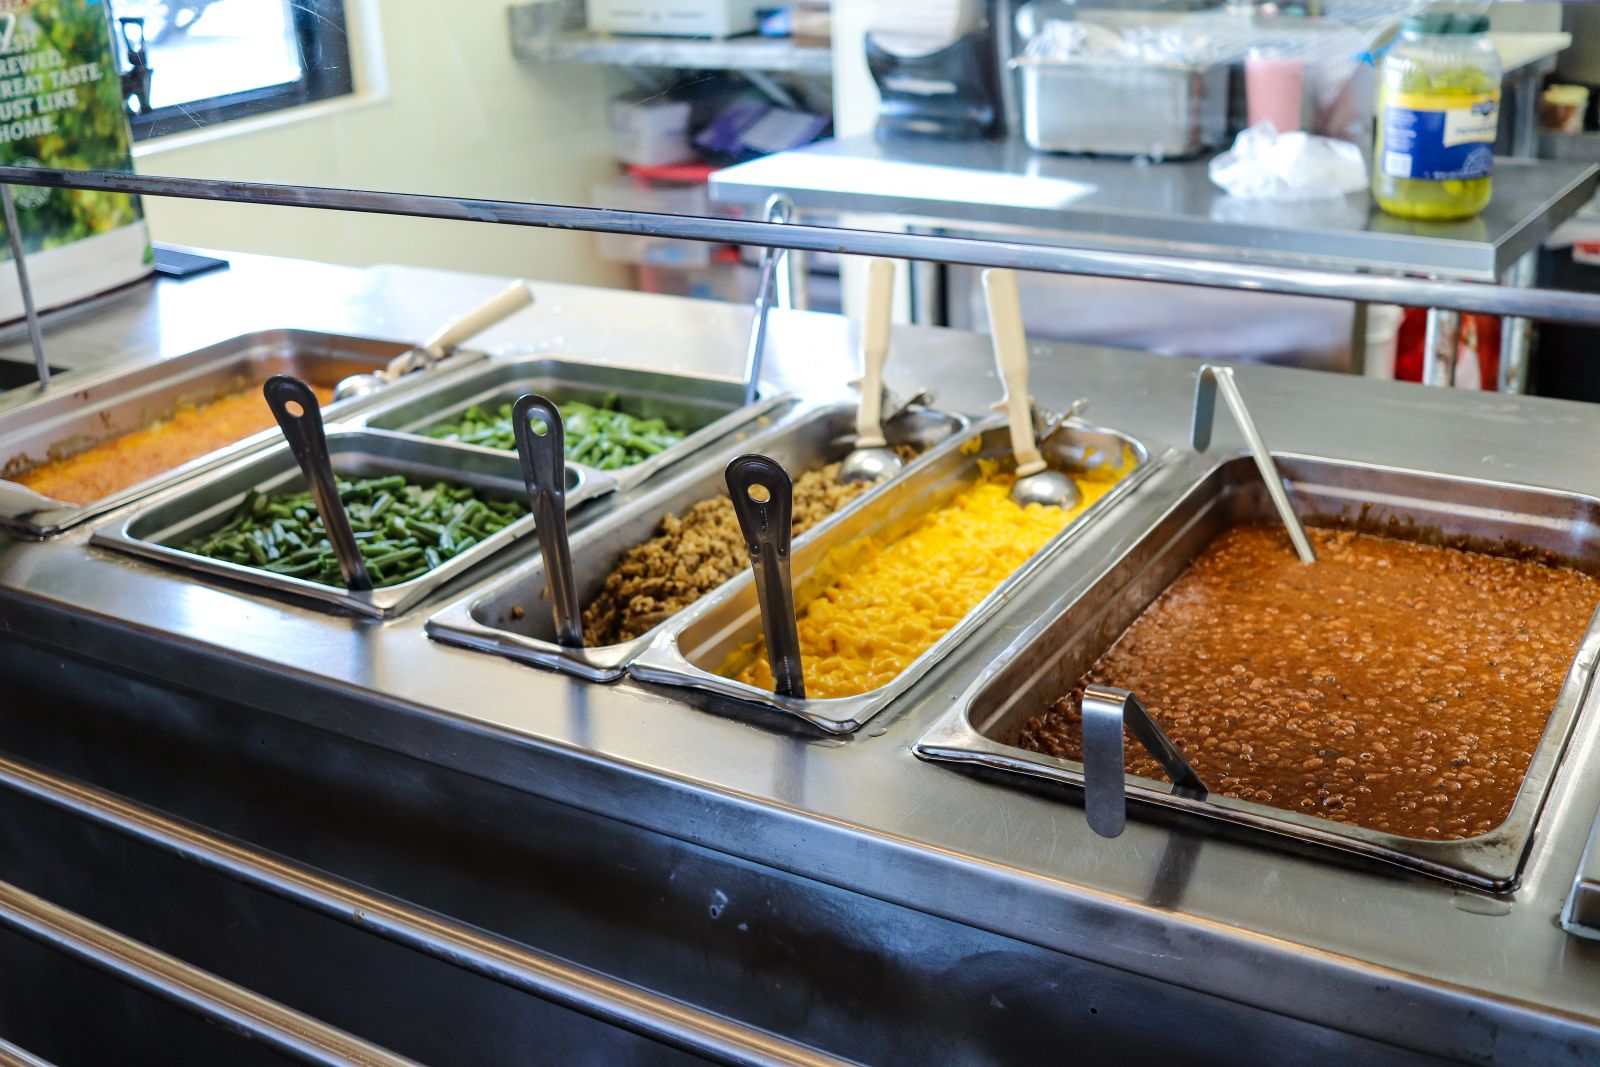 Some of the sides available at our cafeteria style serving area.